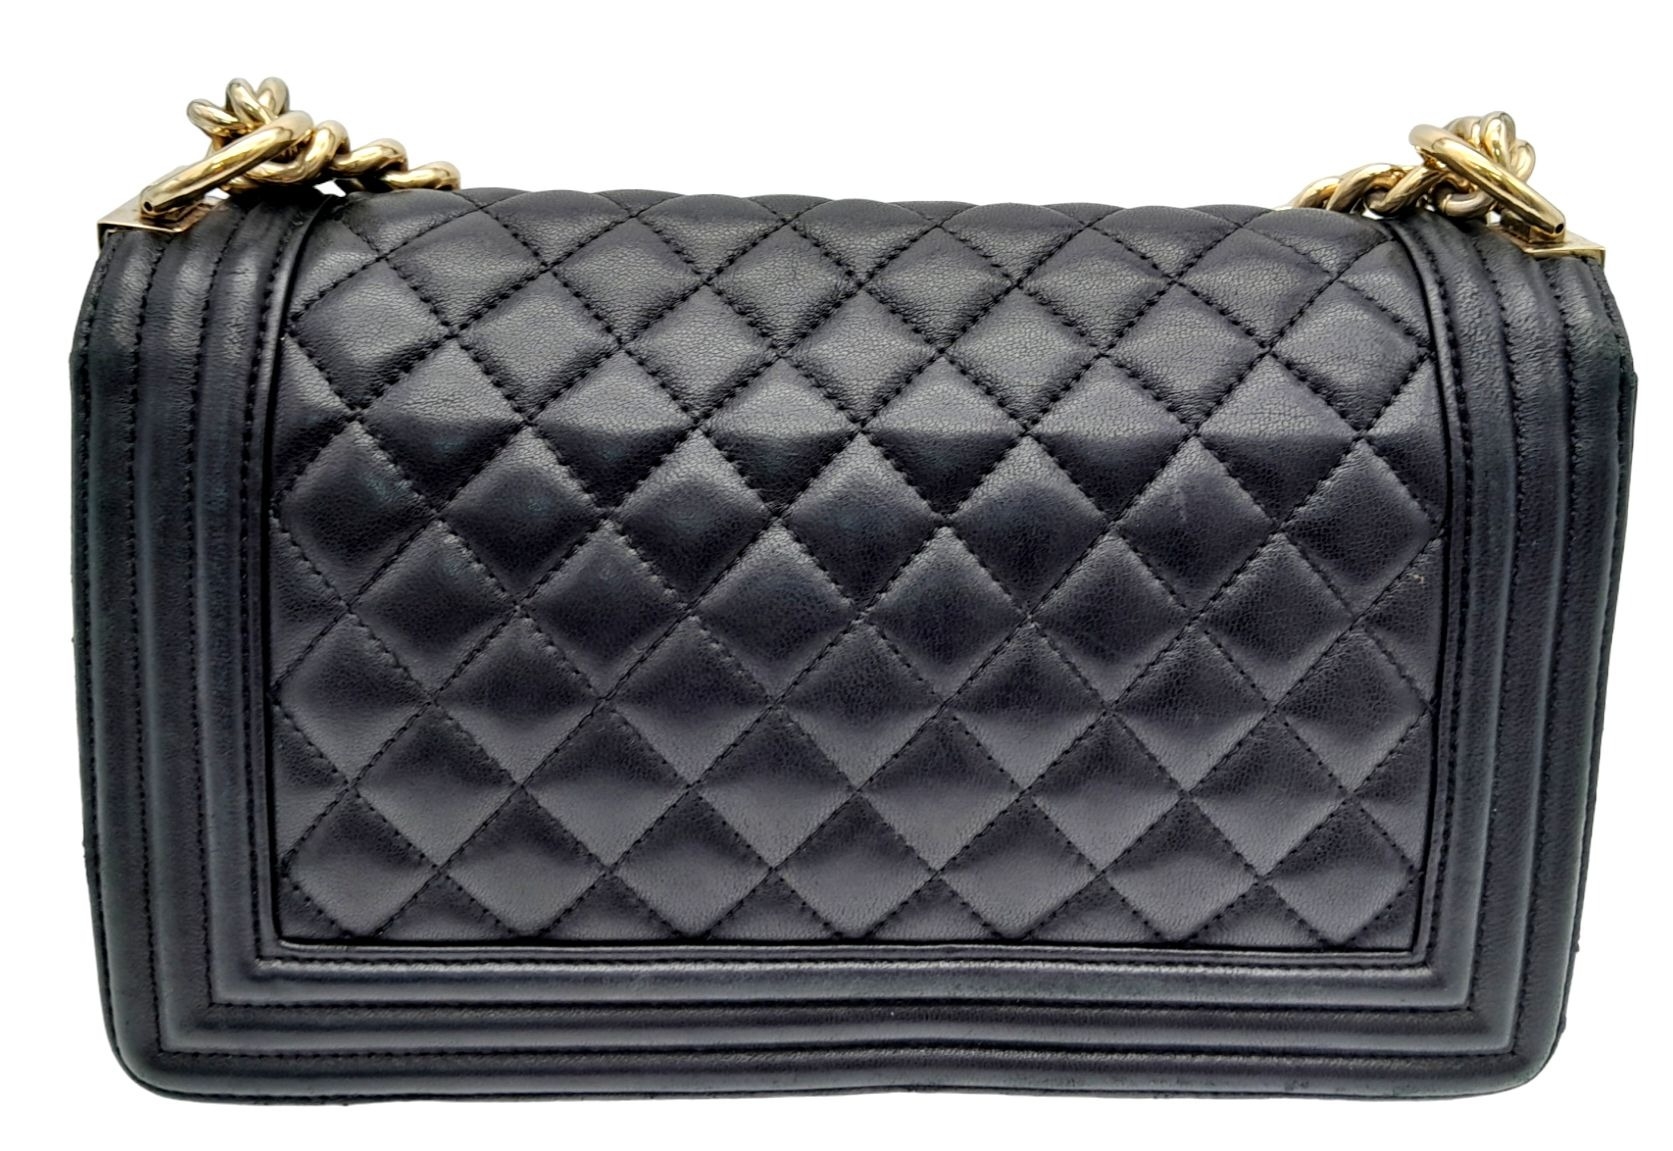 A Chanel Black Boy Bag. Quilted leather exterior with gold-toned hardware, chain and leather - Image 3 of 10